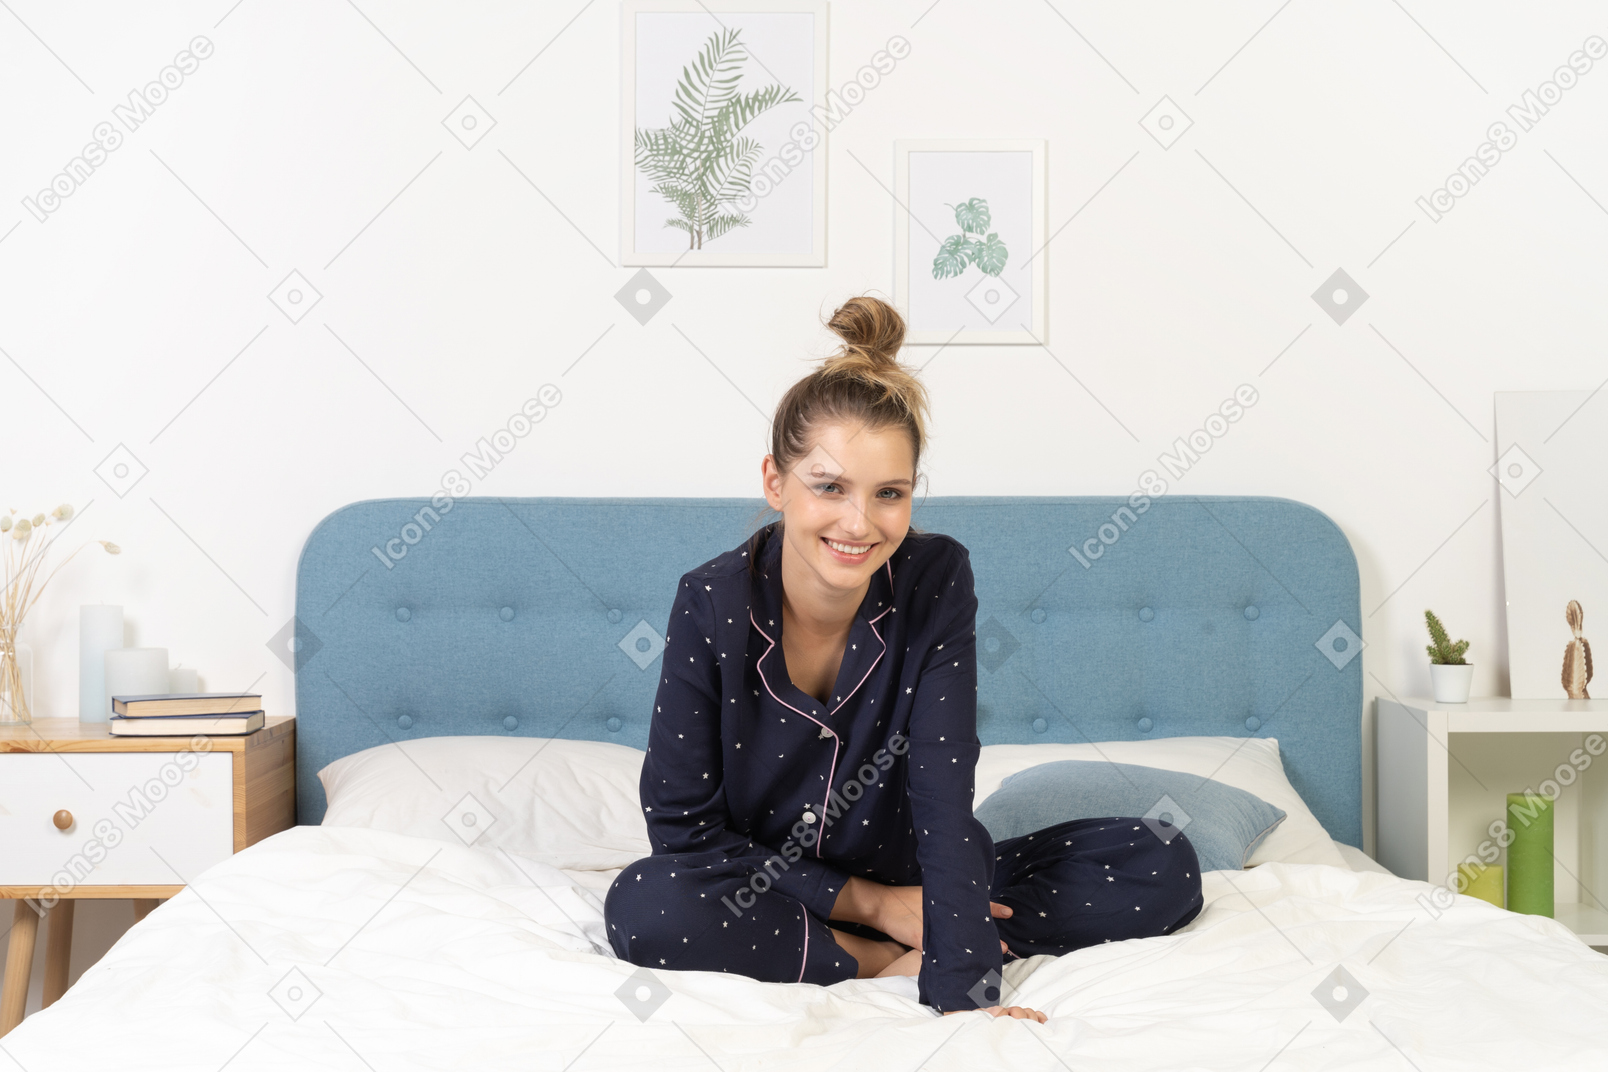 Front view of a smiling young woman in pajamas staying in bed